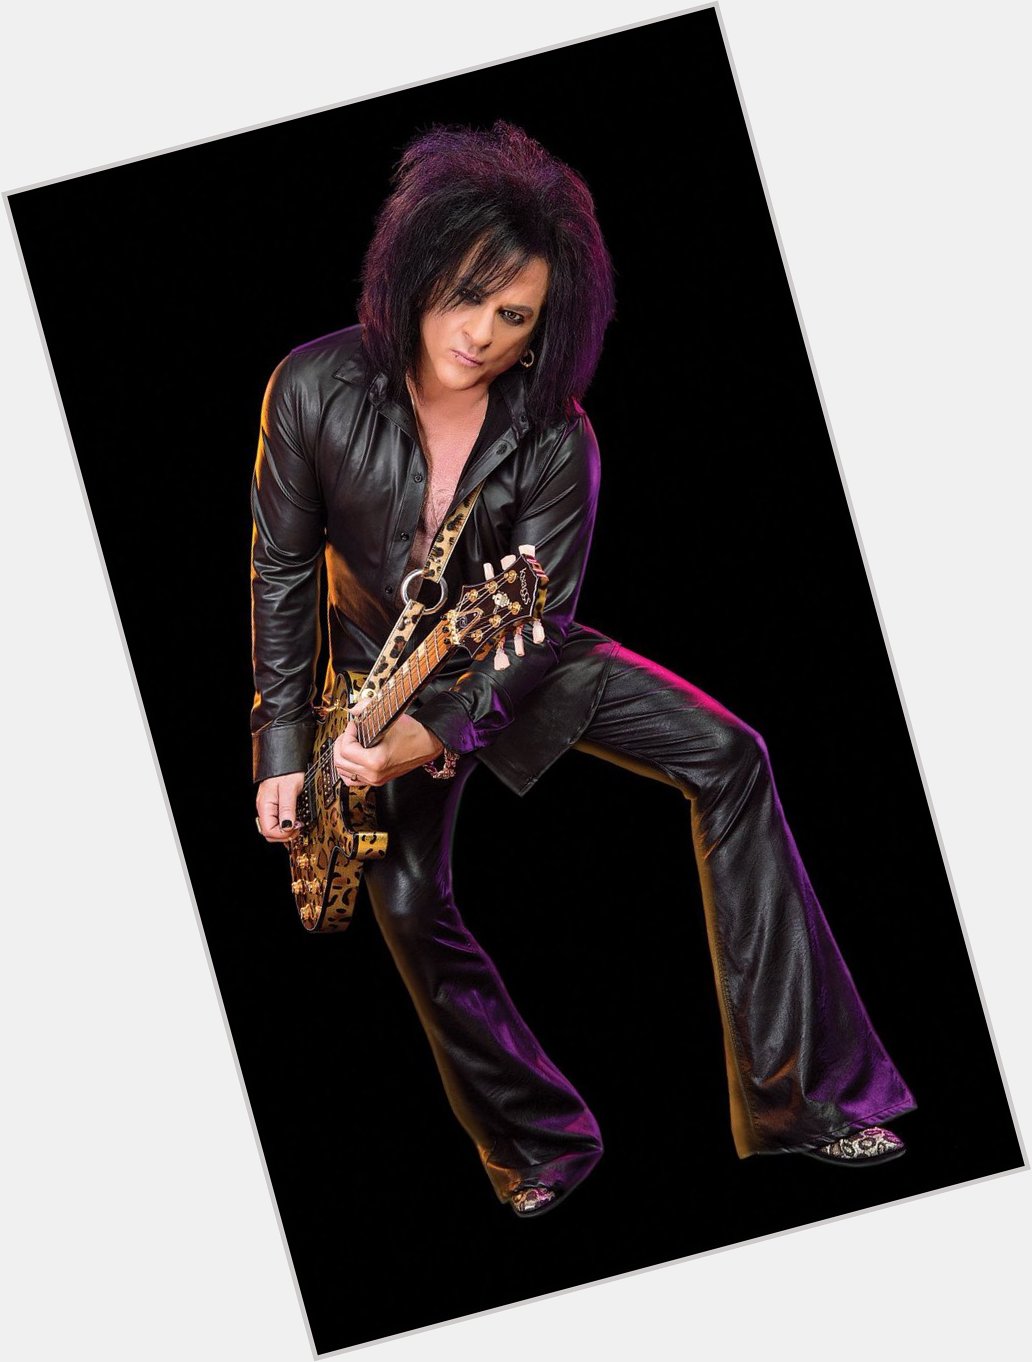   Happy Birthday to you and Steve Stevens today. 